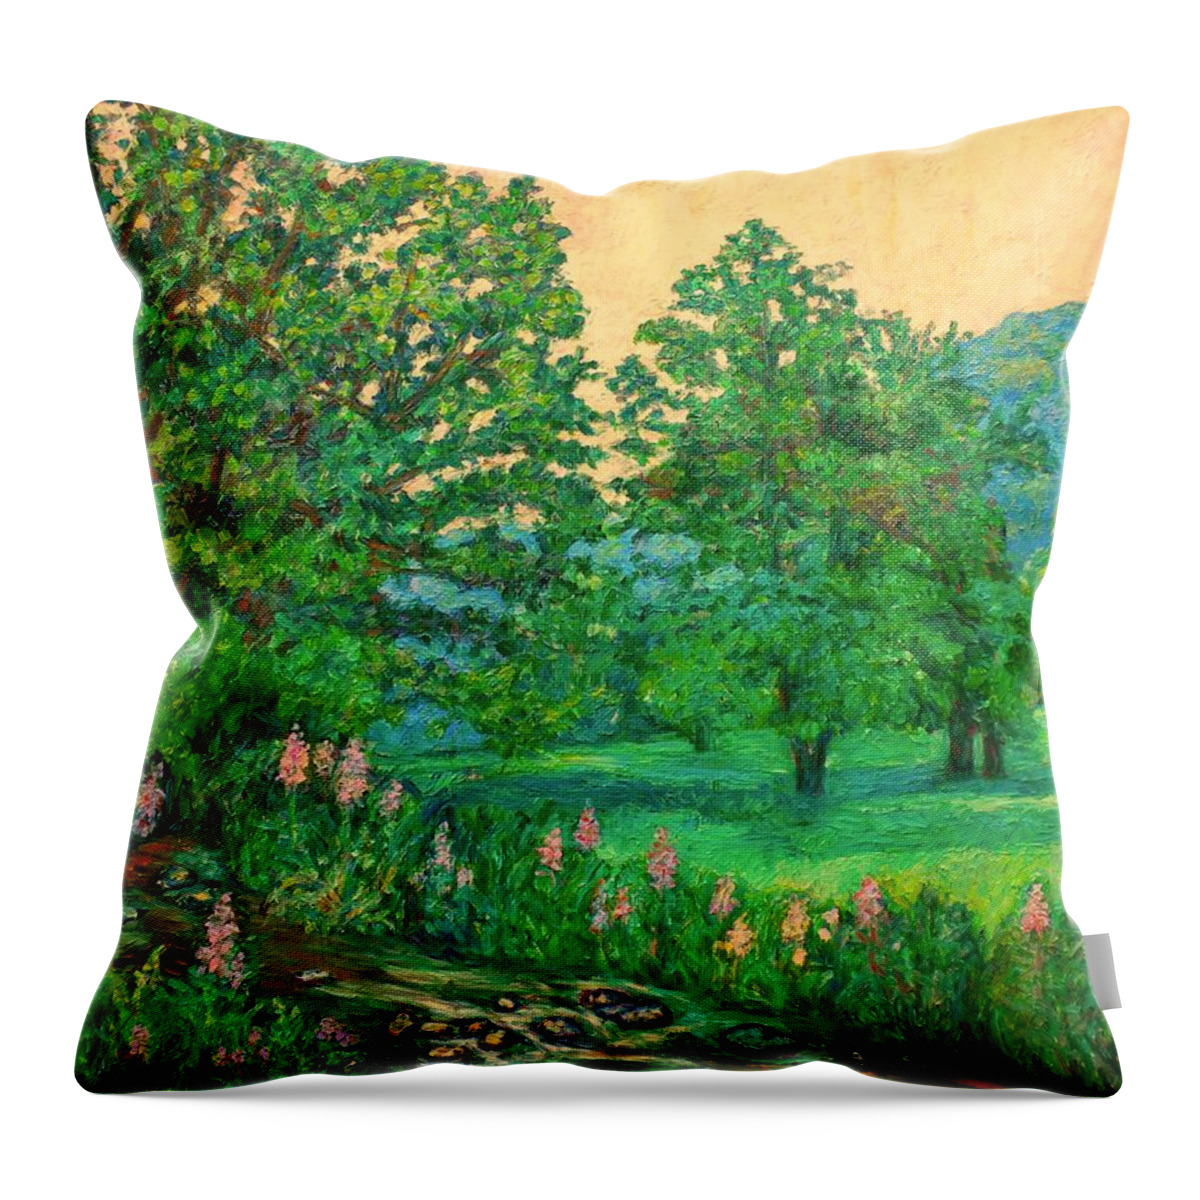 Landscape Throw Pillow featuring the painting Park Road in Radford by Kendall Kessler